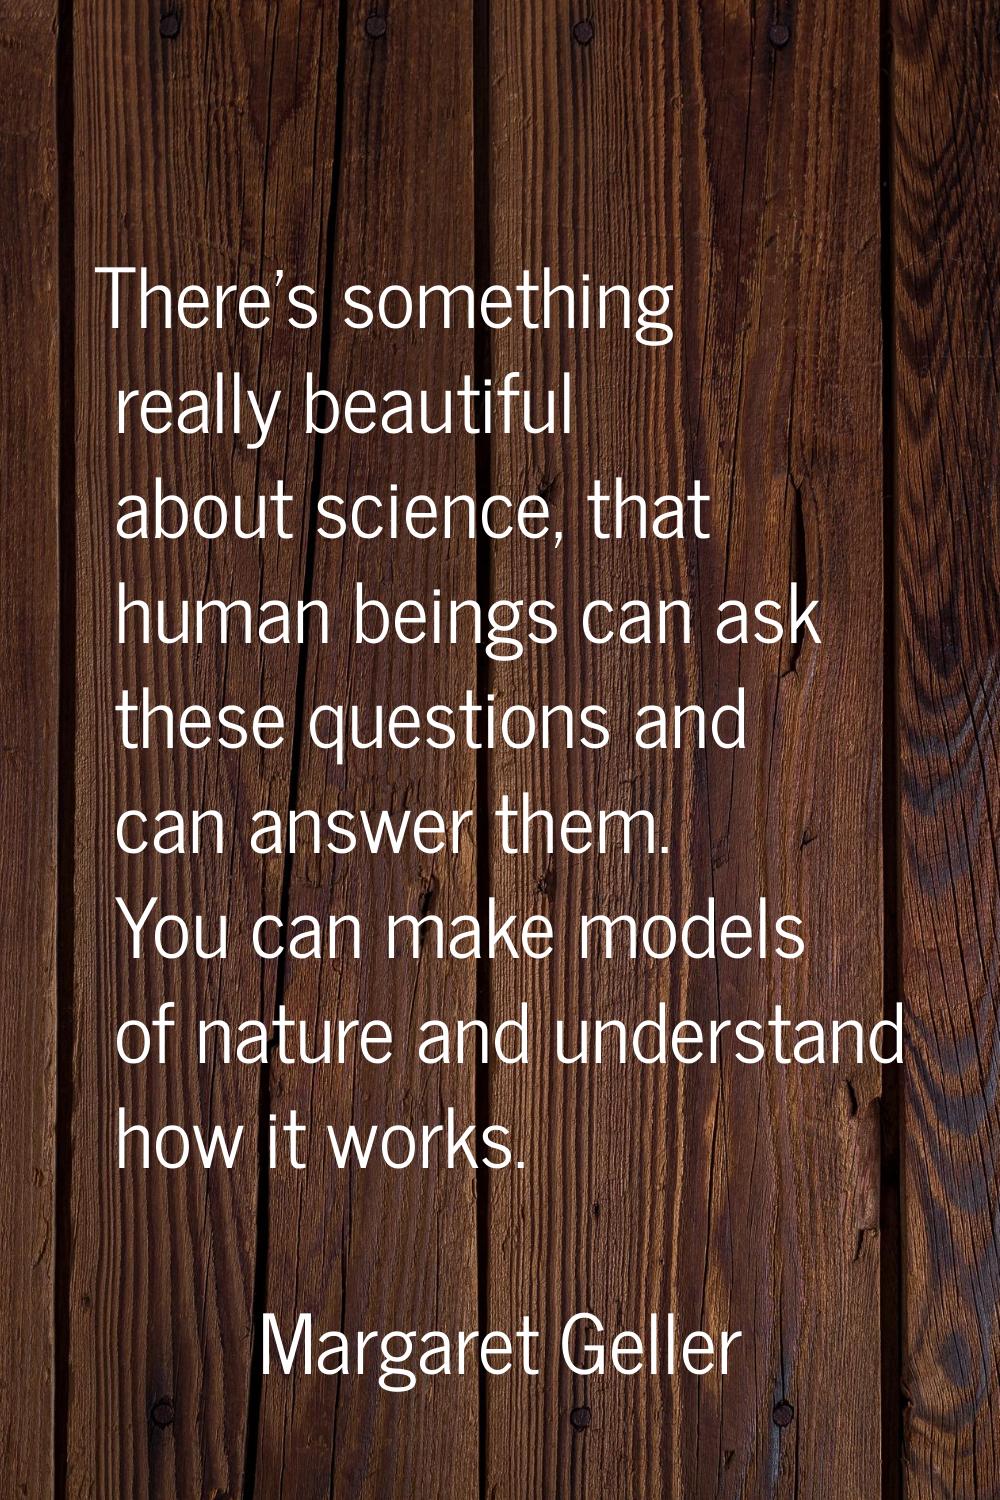 There's something really beautiful about science, that human beings can ask these questions and can